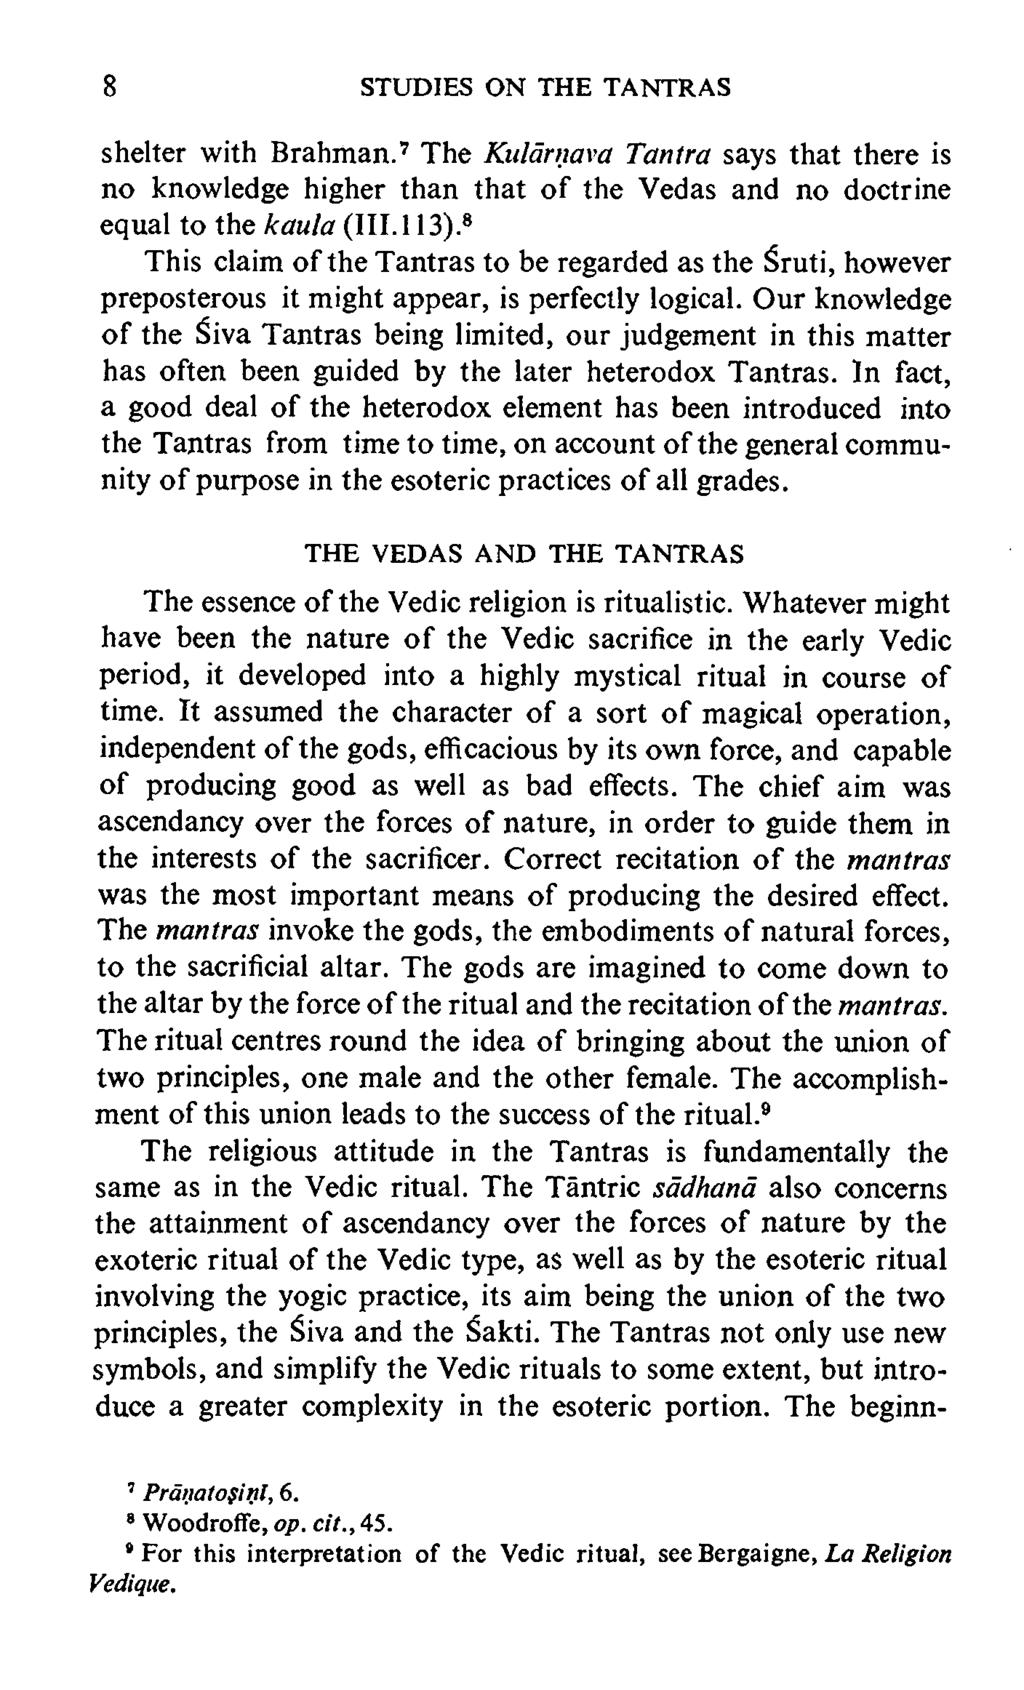 8 STUDIES ON THE TANTRAS shelter with Brahman.7 The Kularnava Tantra says that there is no knowledge higher than that o f the Vedas and no doctrine equal to the kaula (III. 113).